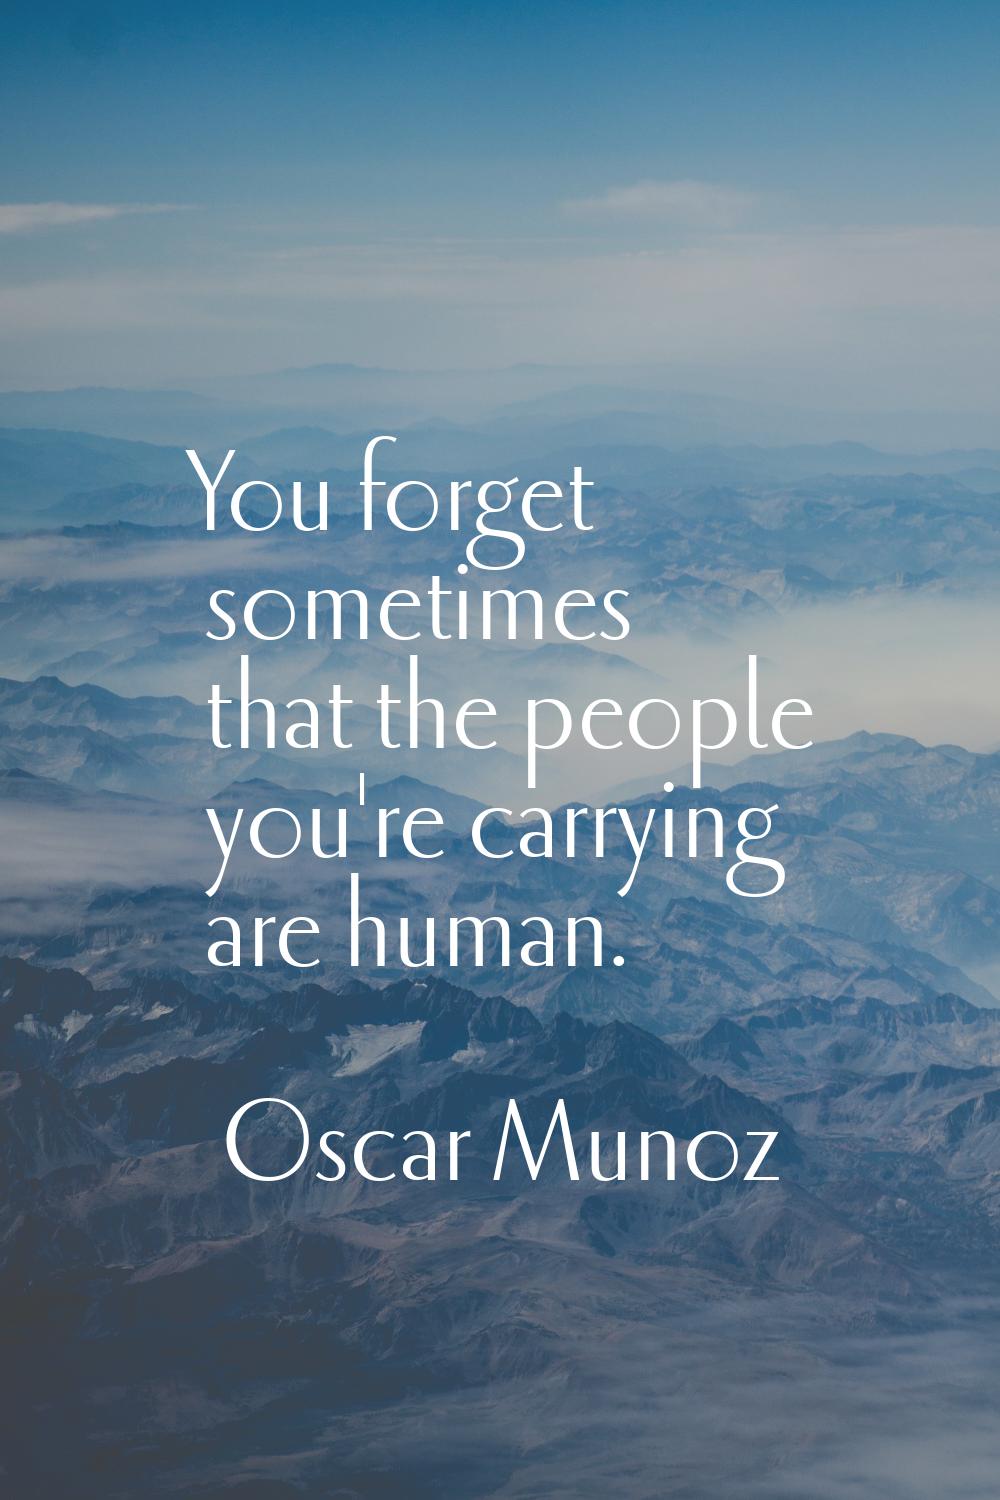 You forget sometimes that the people you're carrying are human.